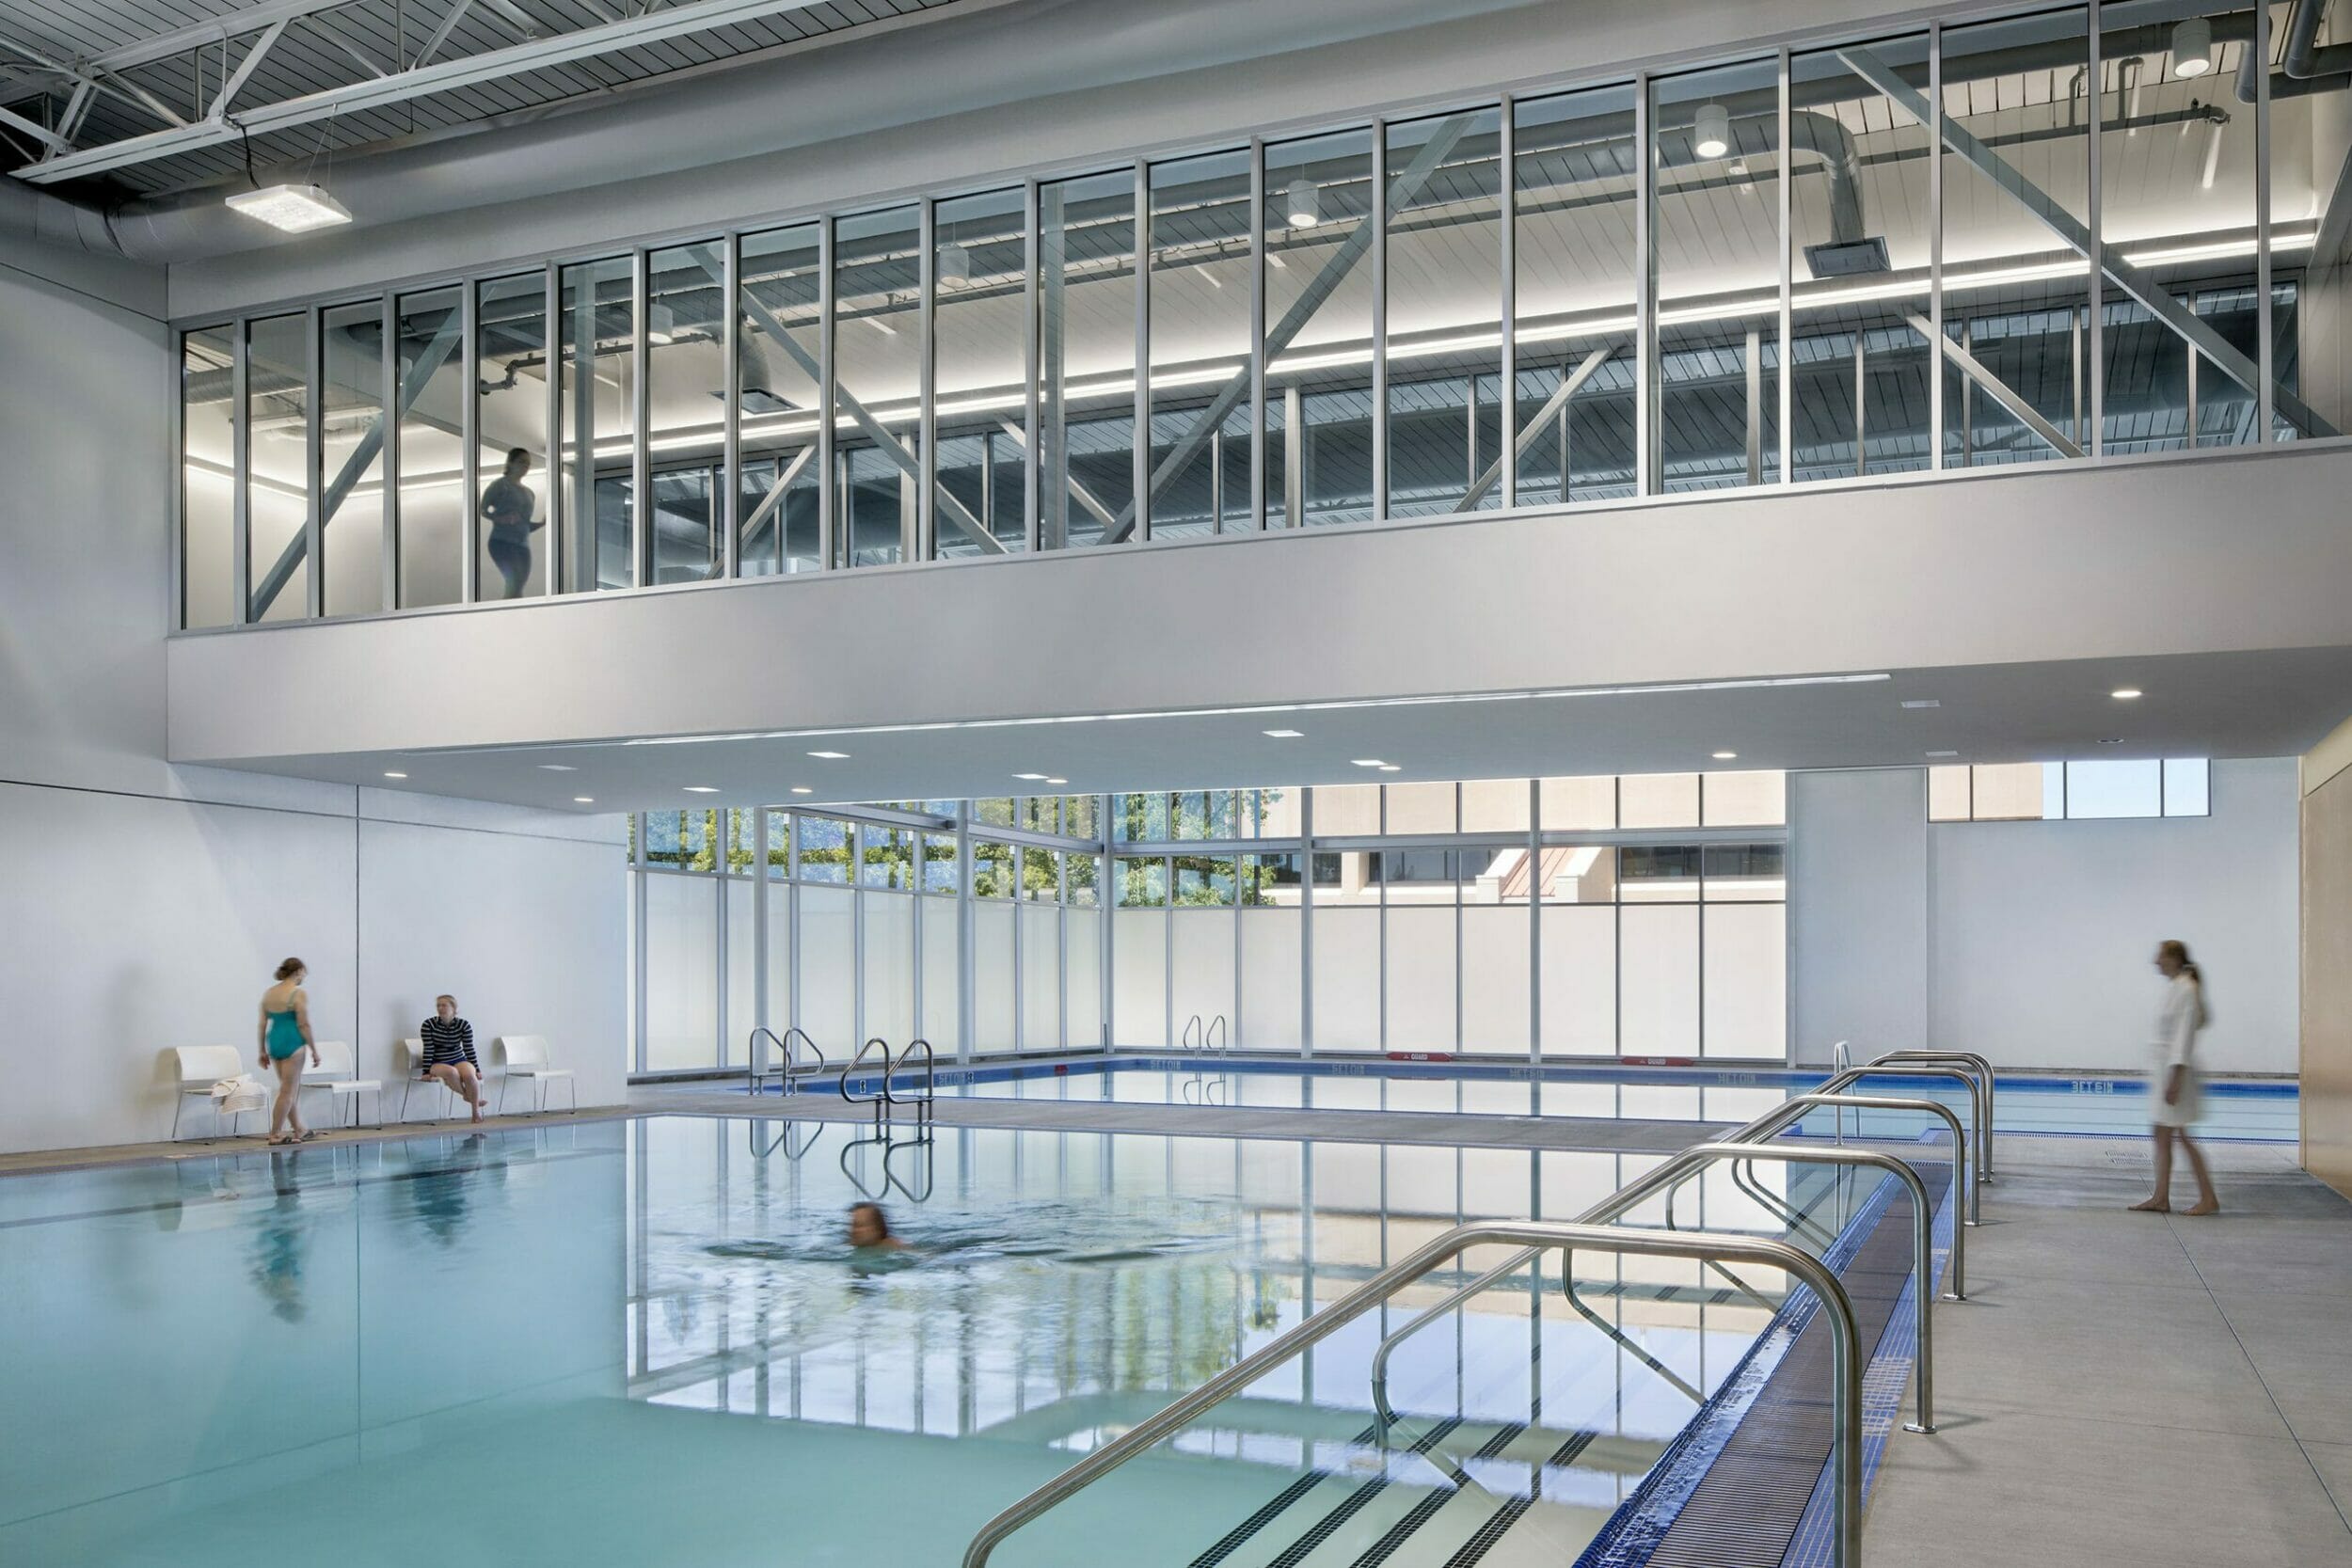 two indoor pools on the first floor of a two-story room inside a wellness center with people swimming and walking above in a glass walkway